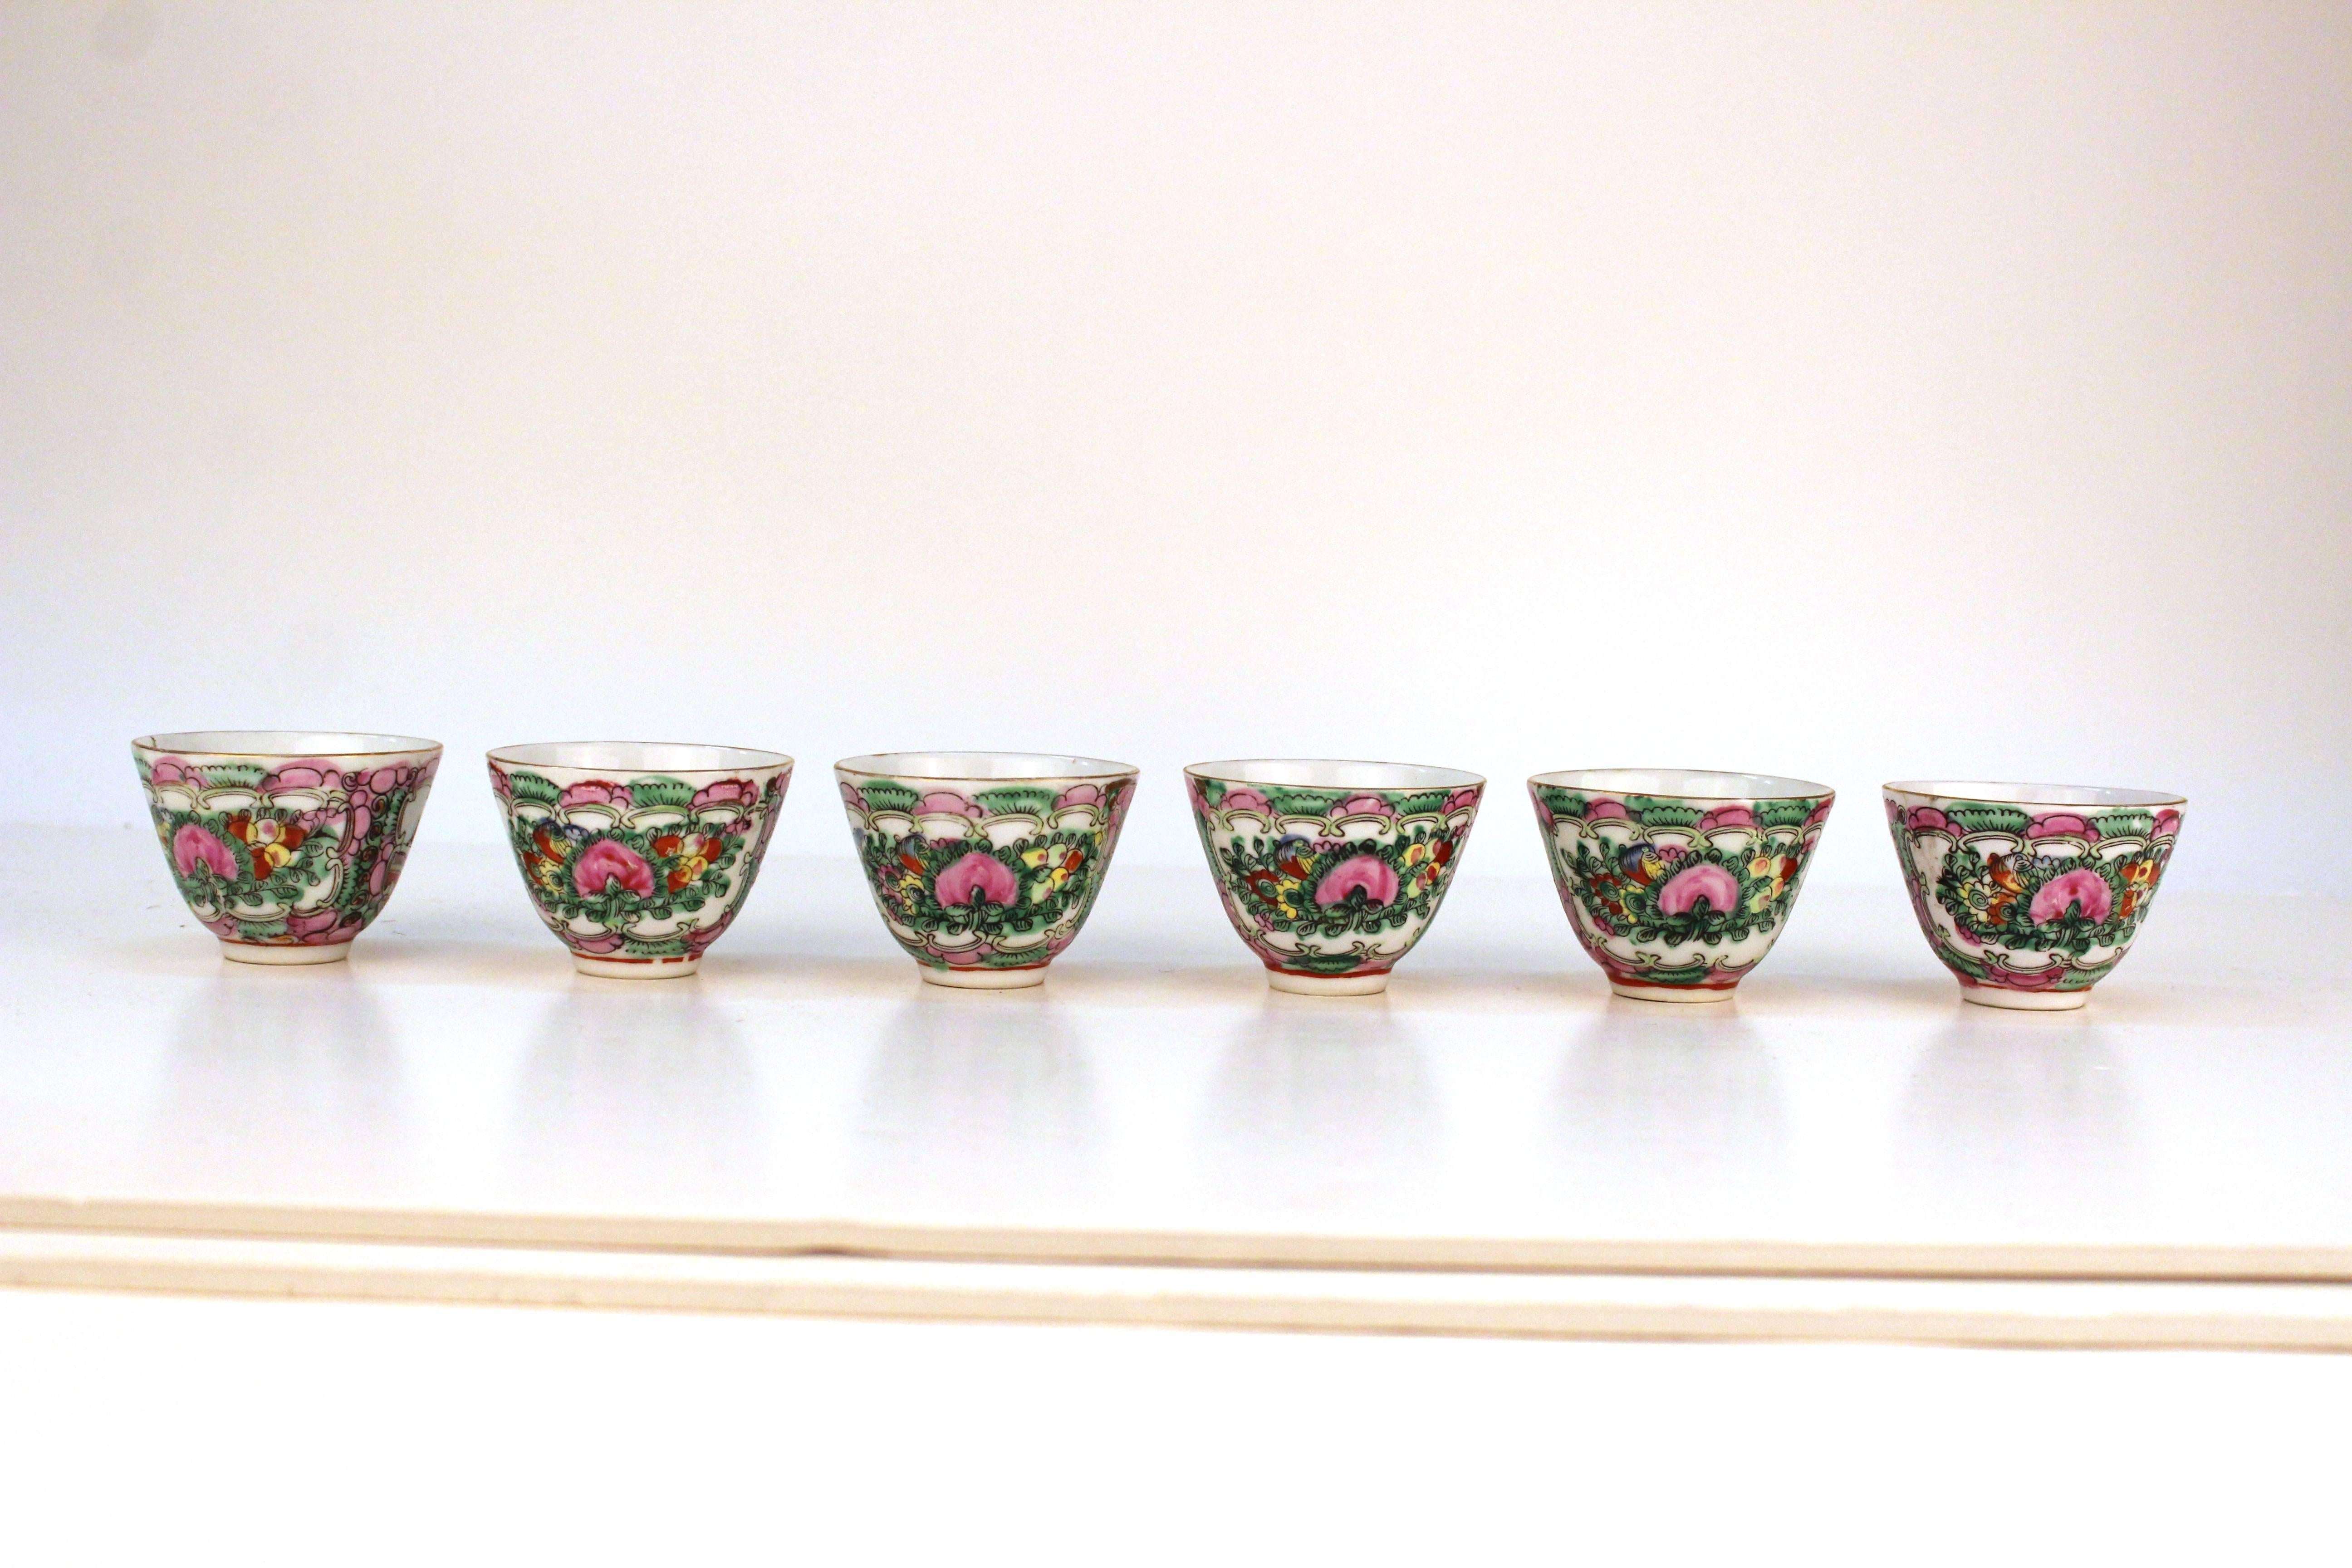 Set of six Asian porcelain cups. Each with an elaborate floral design and lovers scene in bright hues of pink, orange and green. In overall good condition with wear appropriate to age and use. Matching plates available. 

110617


          